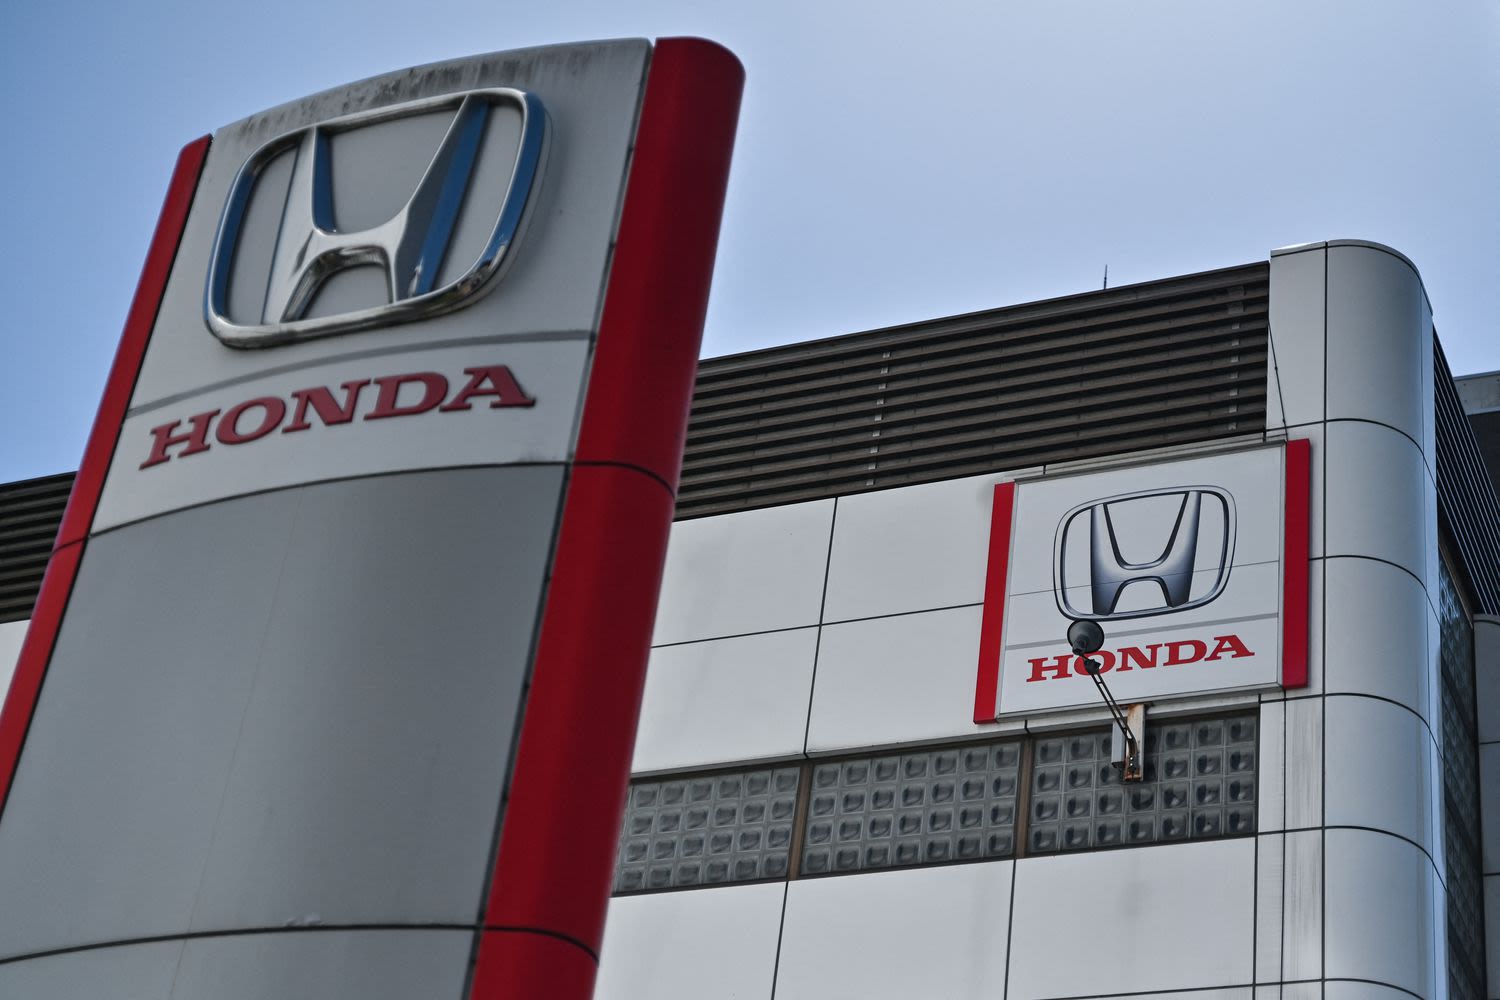 Honda Plans To Invest Almost $65 Billion on EV Strategy Through Fiscal 2031